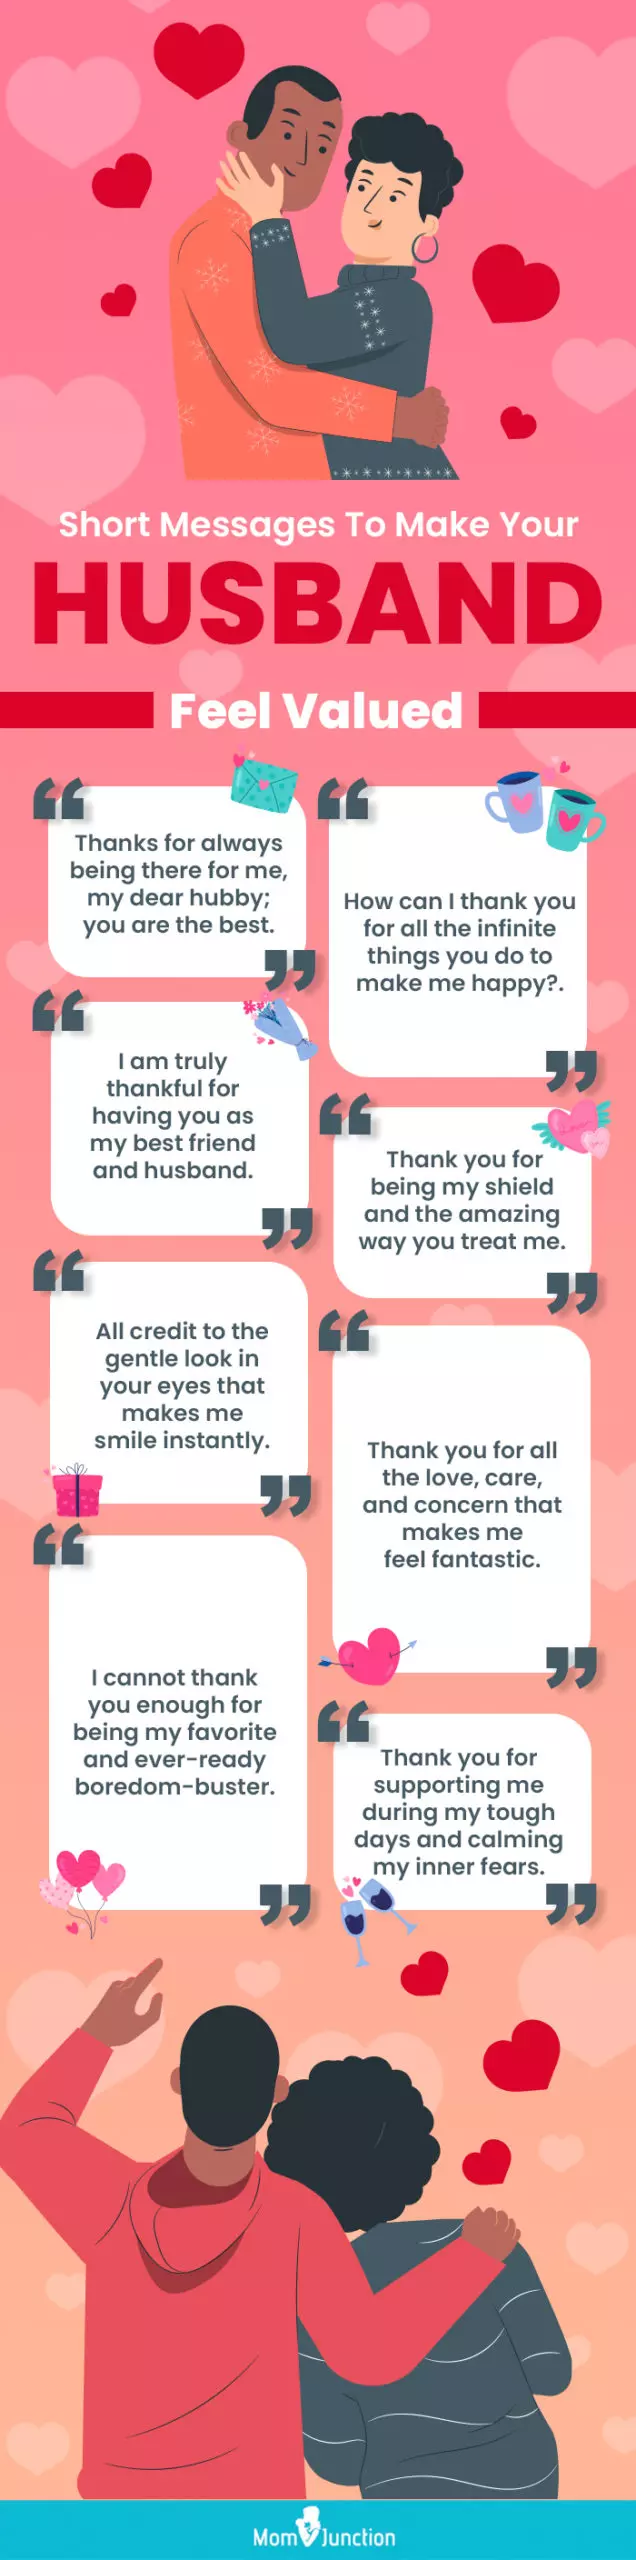 short messages to make your husband feel valued (infographic)